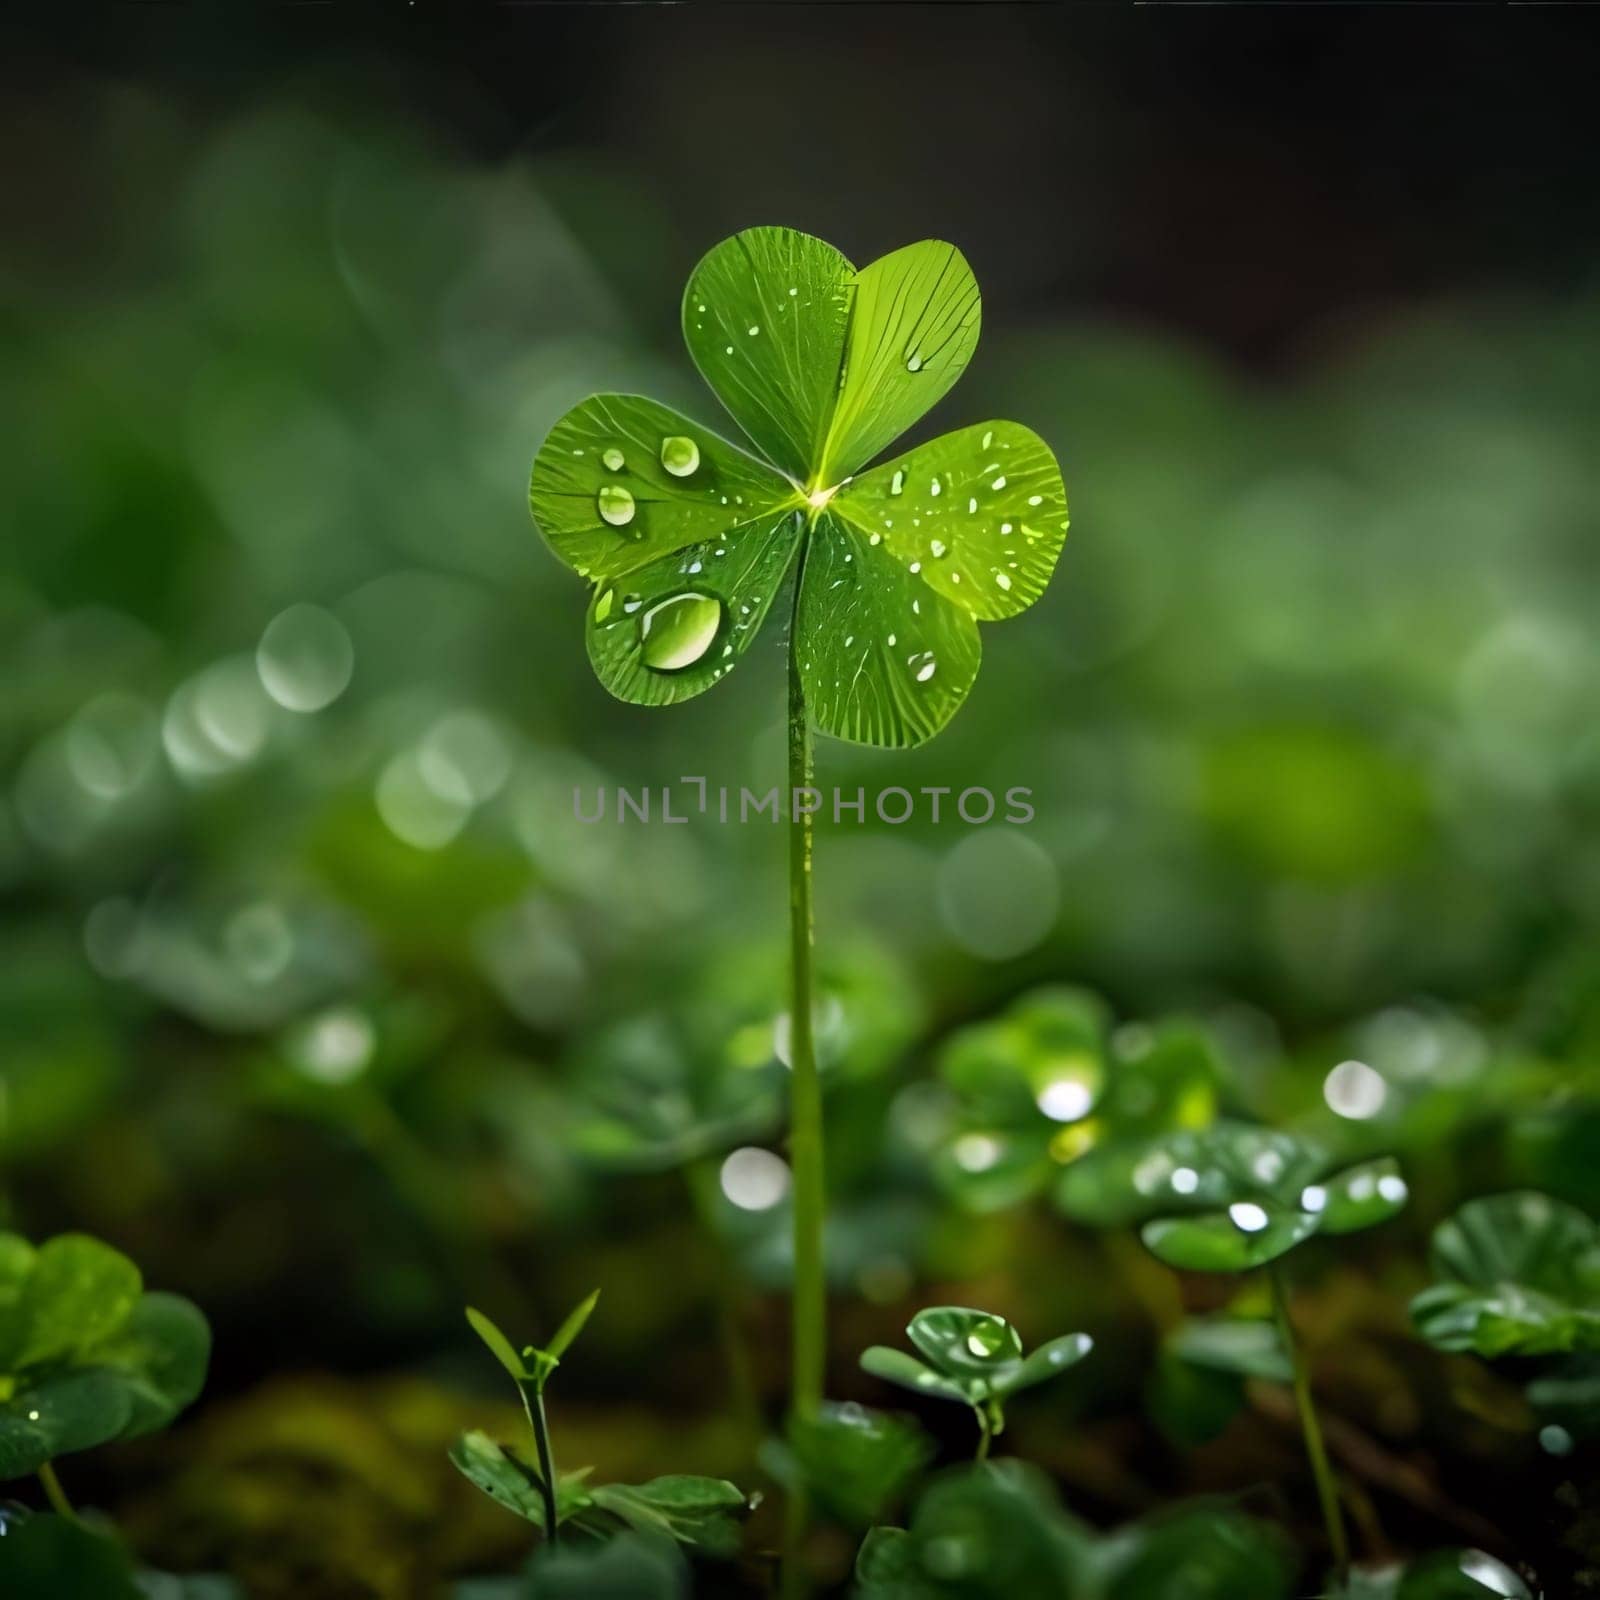 Large three-leaf green clover in a clearing with dewdrops, blurred background. The green color symbol of St. Patrick's Day. A joyous time of celebration in the green color.